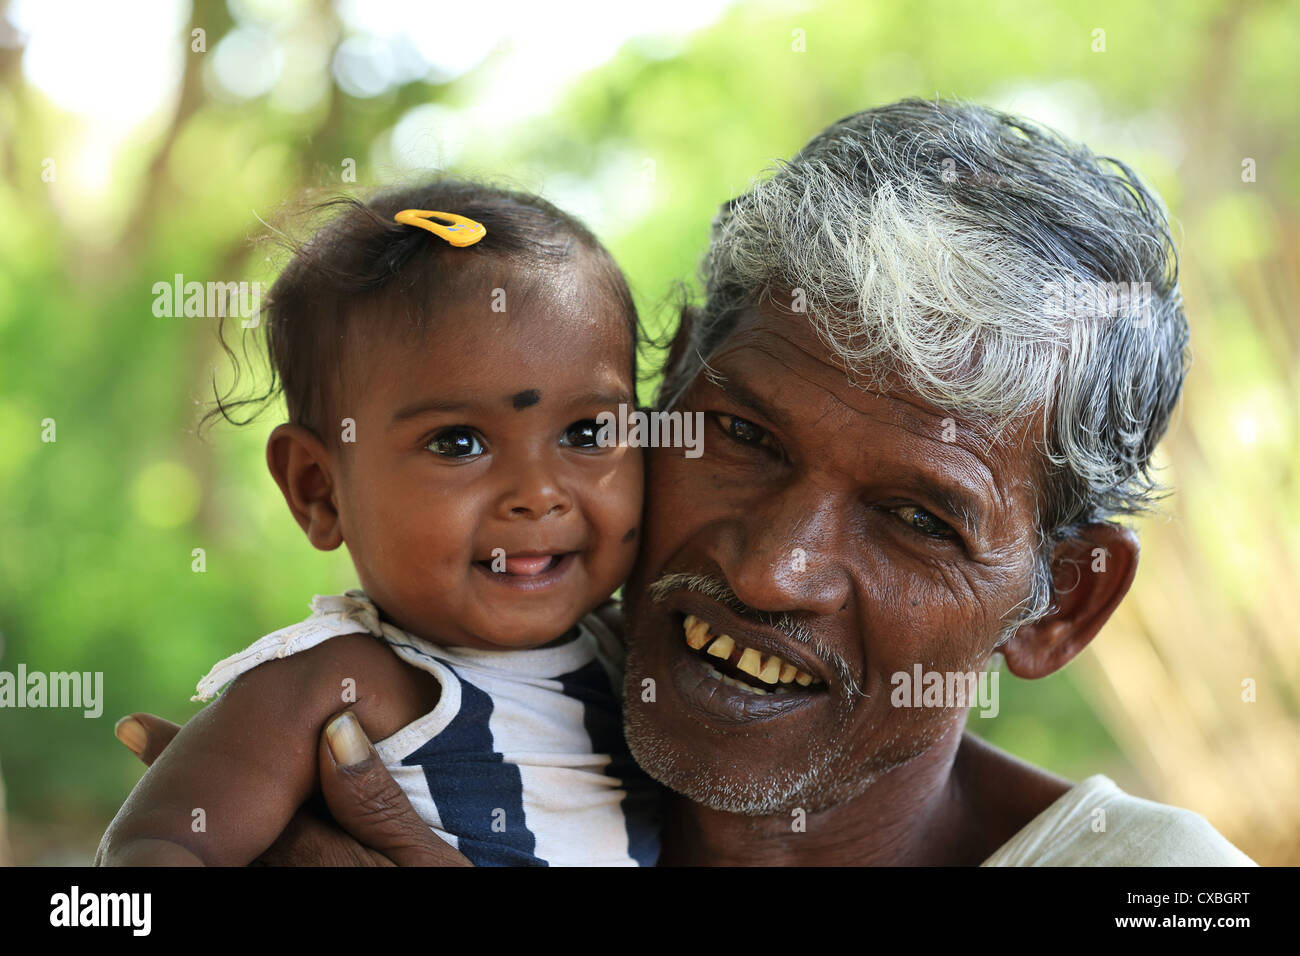 Rural old man with little girl Andhra Pradesh South India Stock Photo